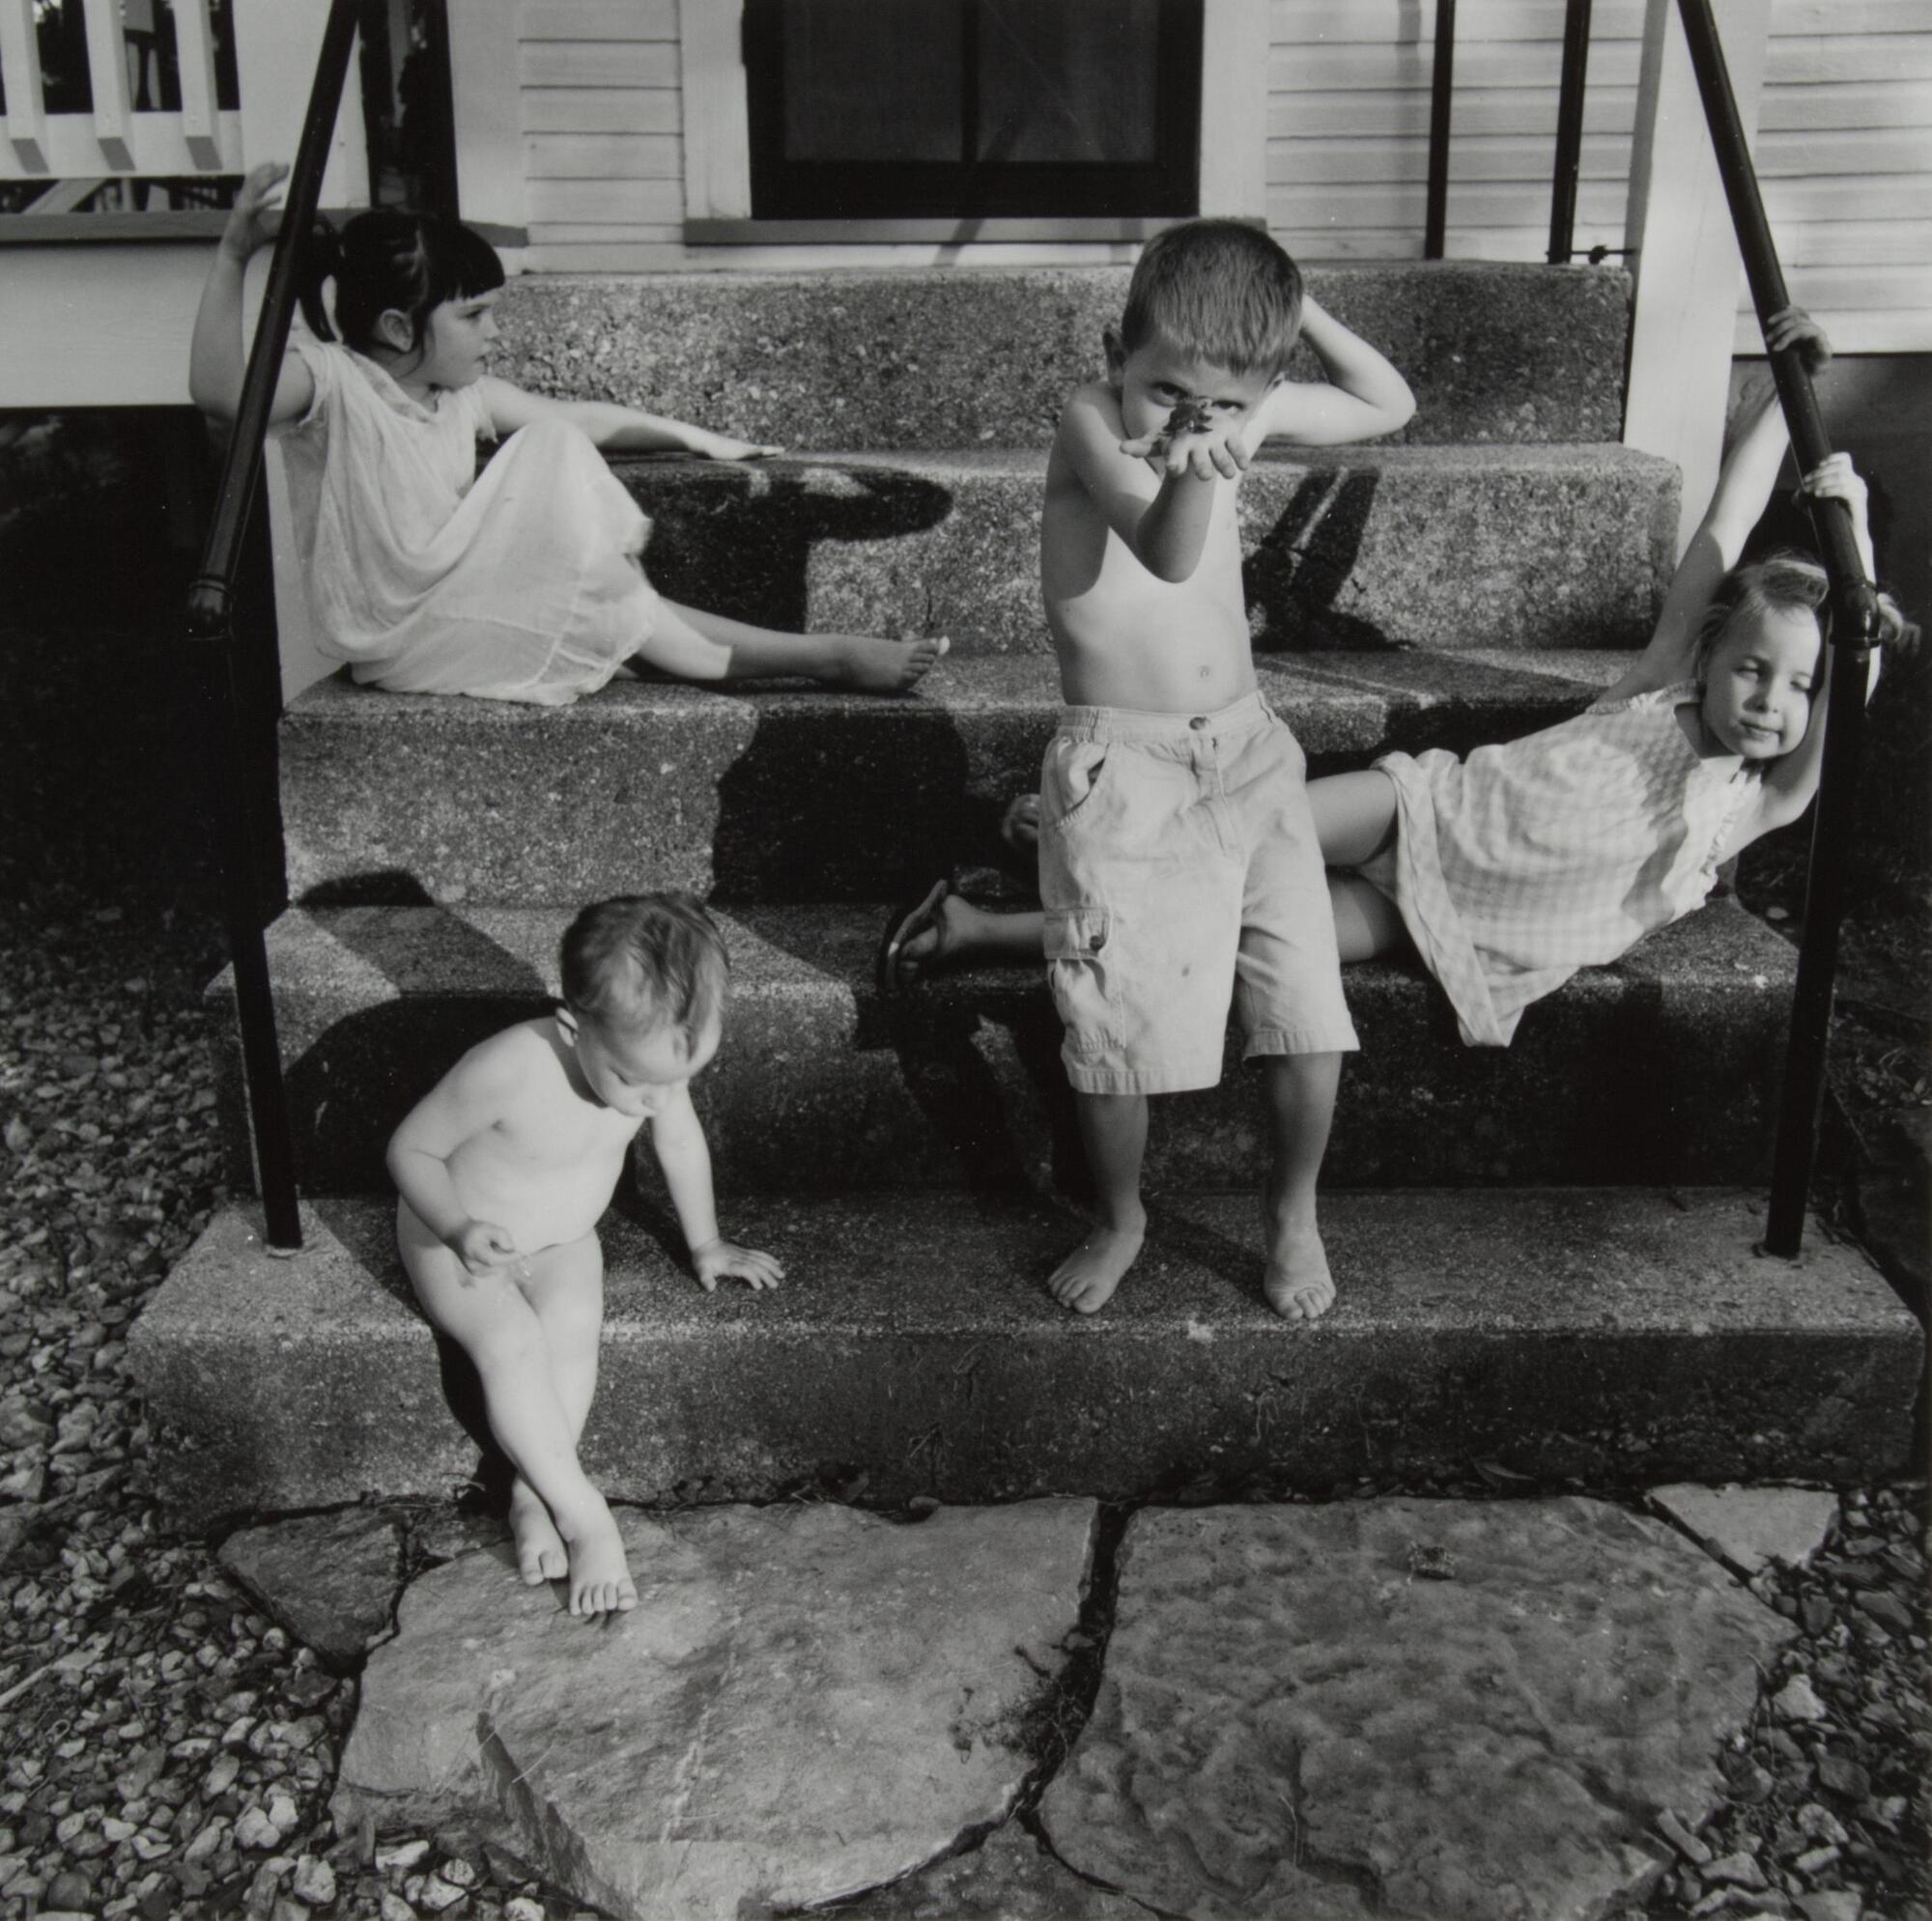 A photograph of four children in front of a house entrance. Two girls hold onto the railing and recline on either side. An infant sits on the bottom step, while another young boy stands on the first step, holding a frog in front of his face.